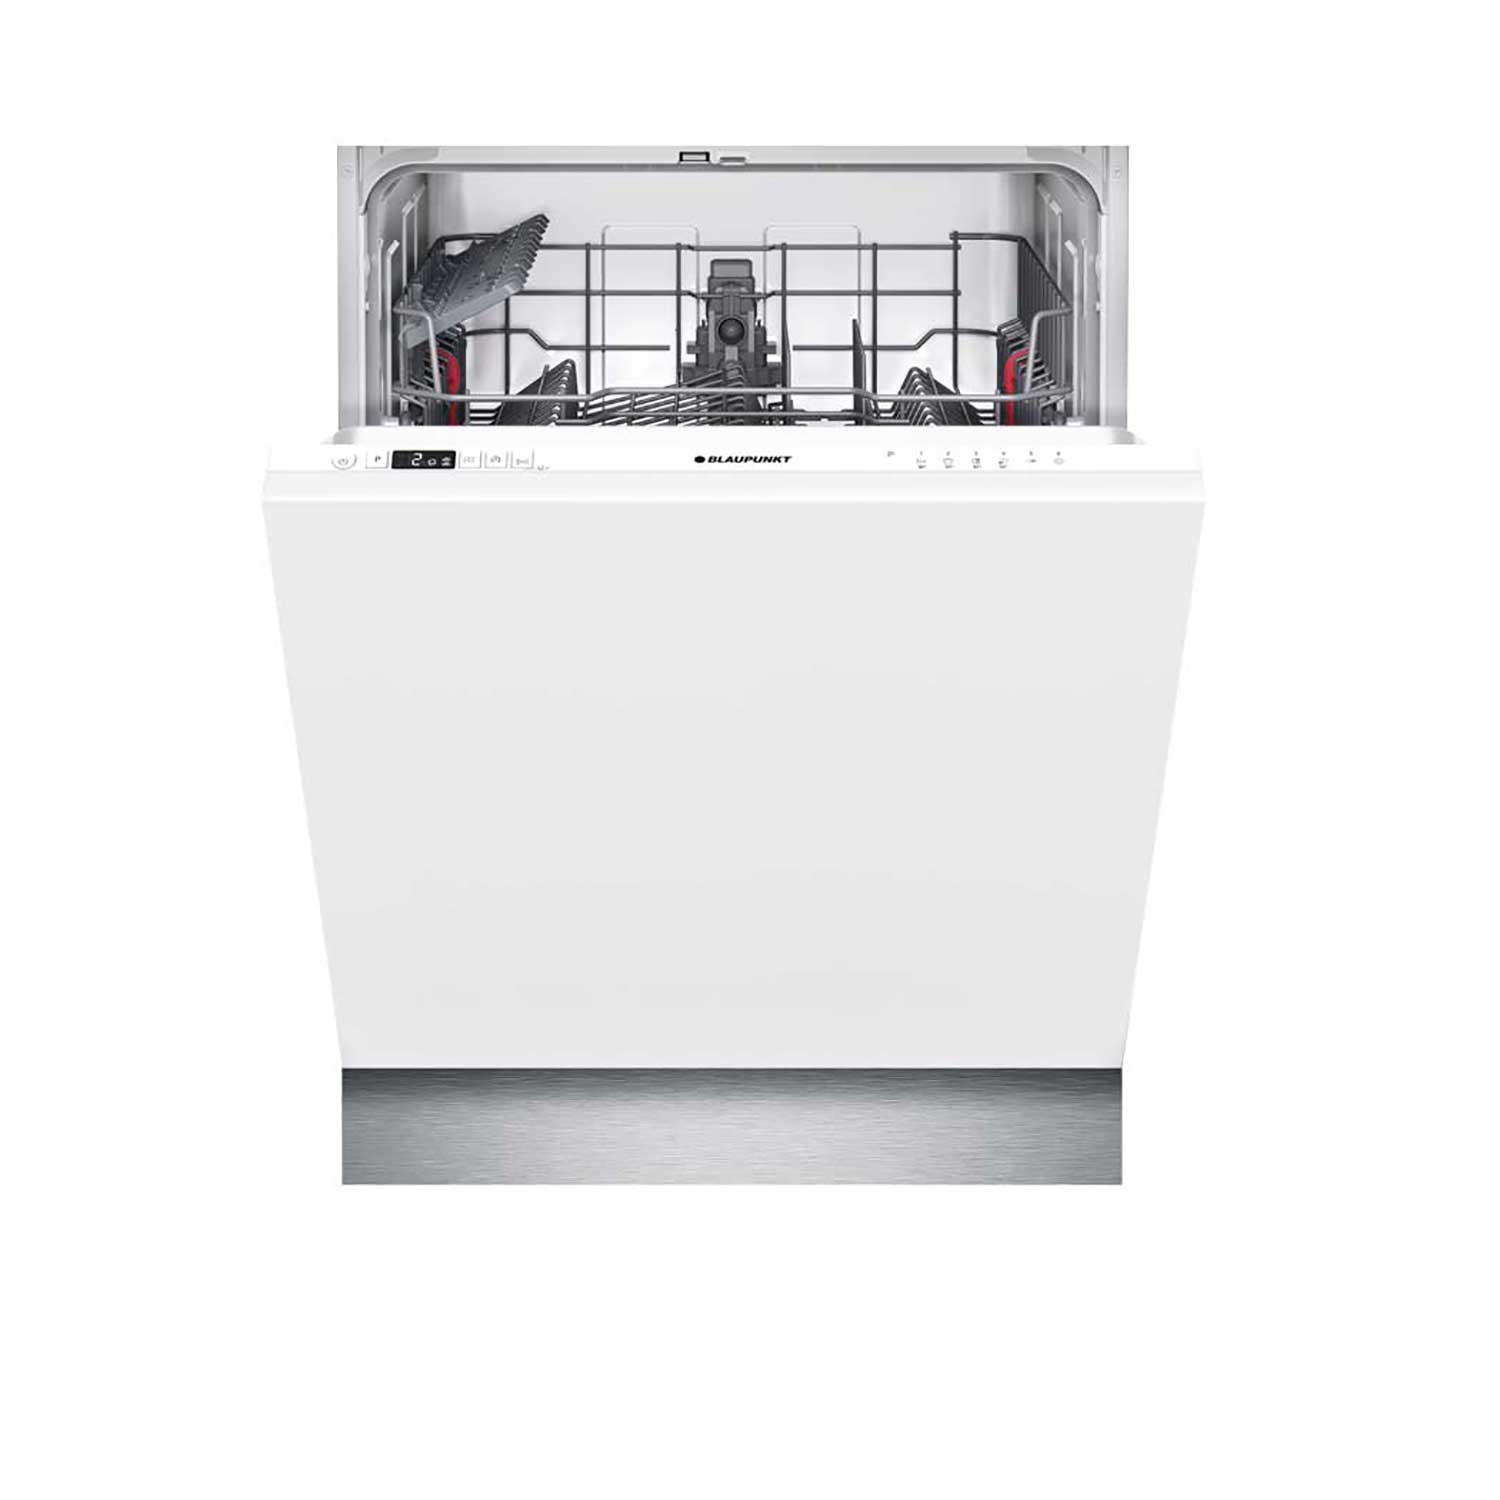 Built-in fully integrated Dishwasher